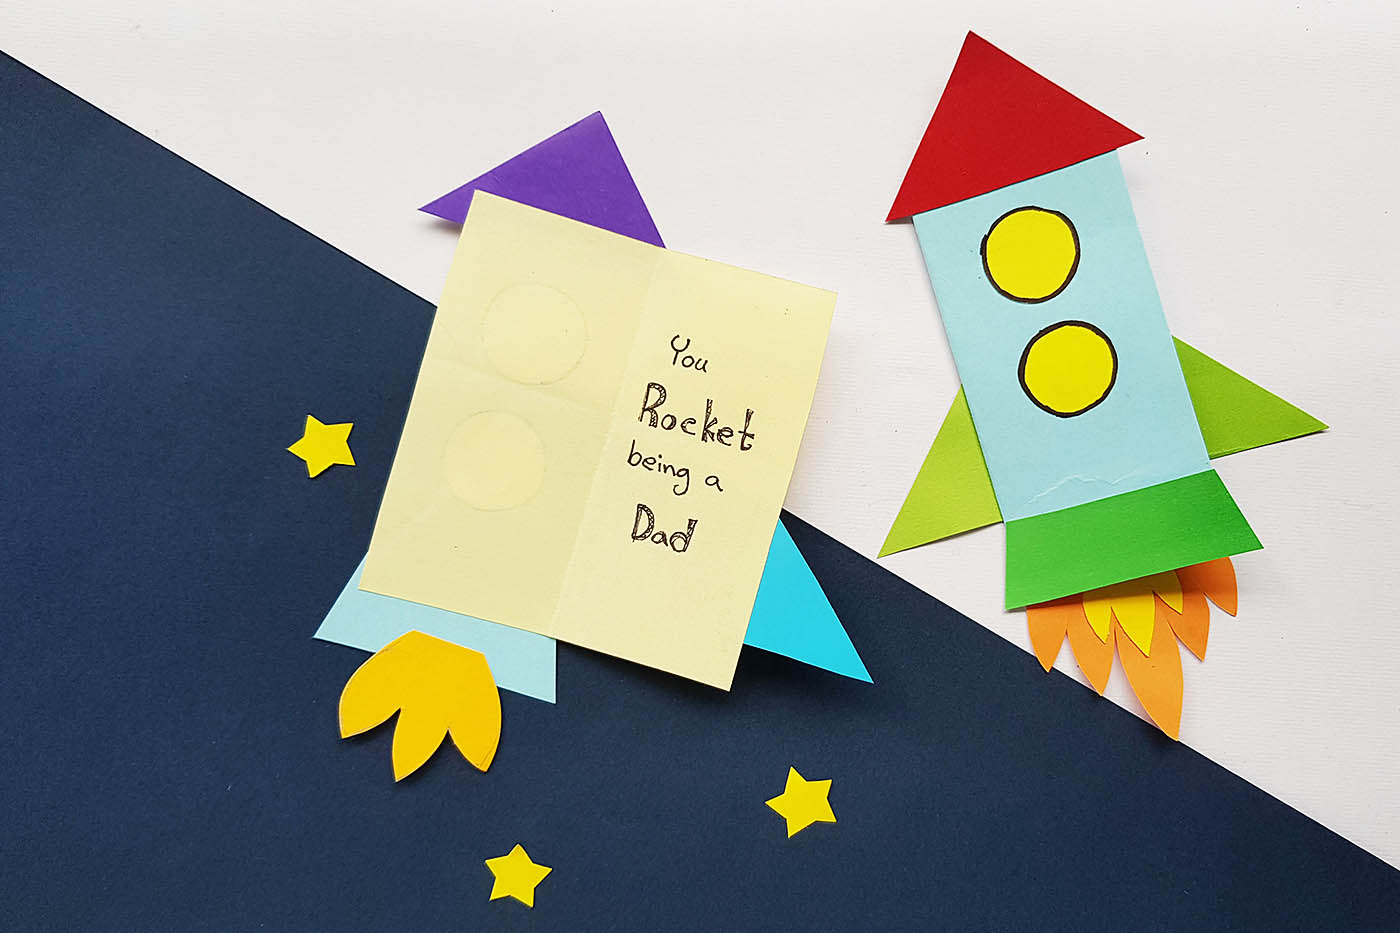 DIY Punny Rocket Father's Day Card - You Rock-et Being a Dad